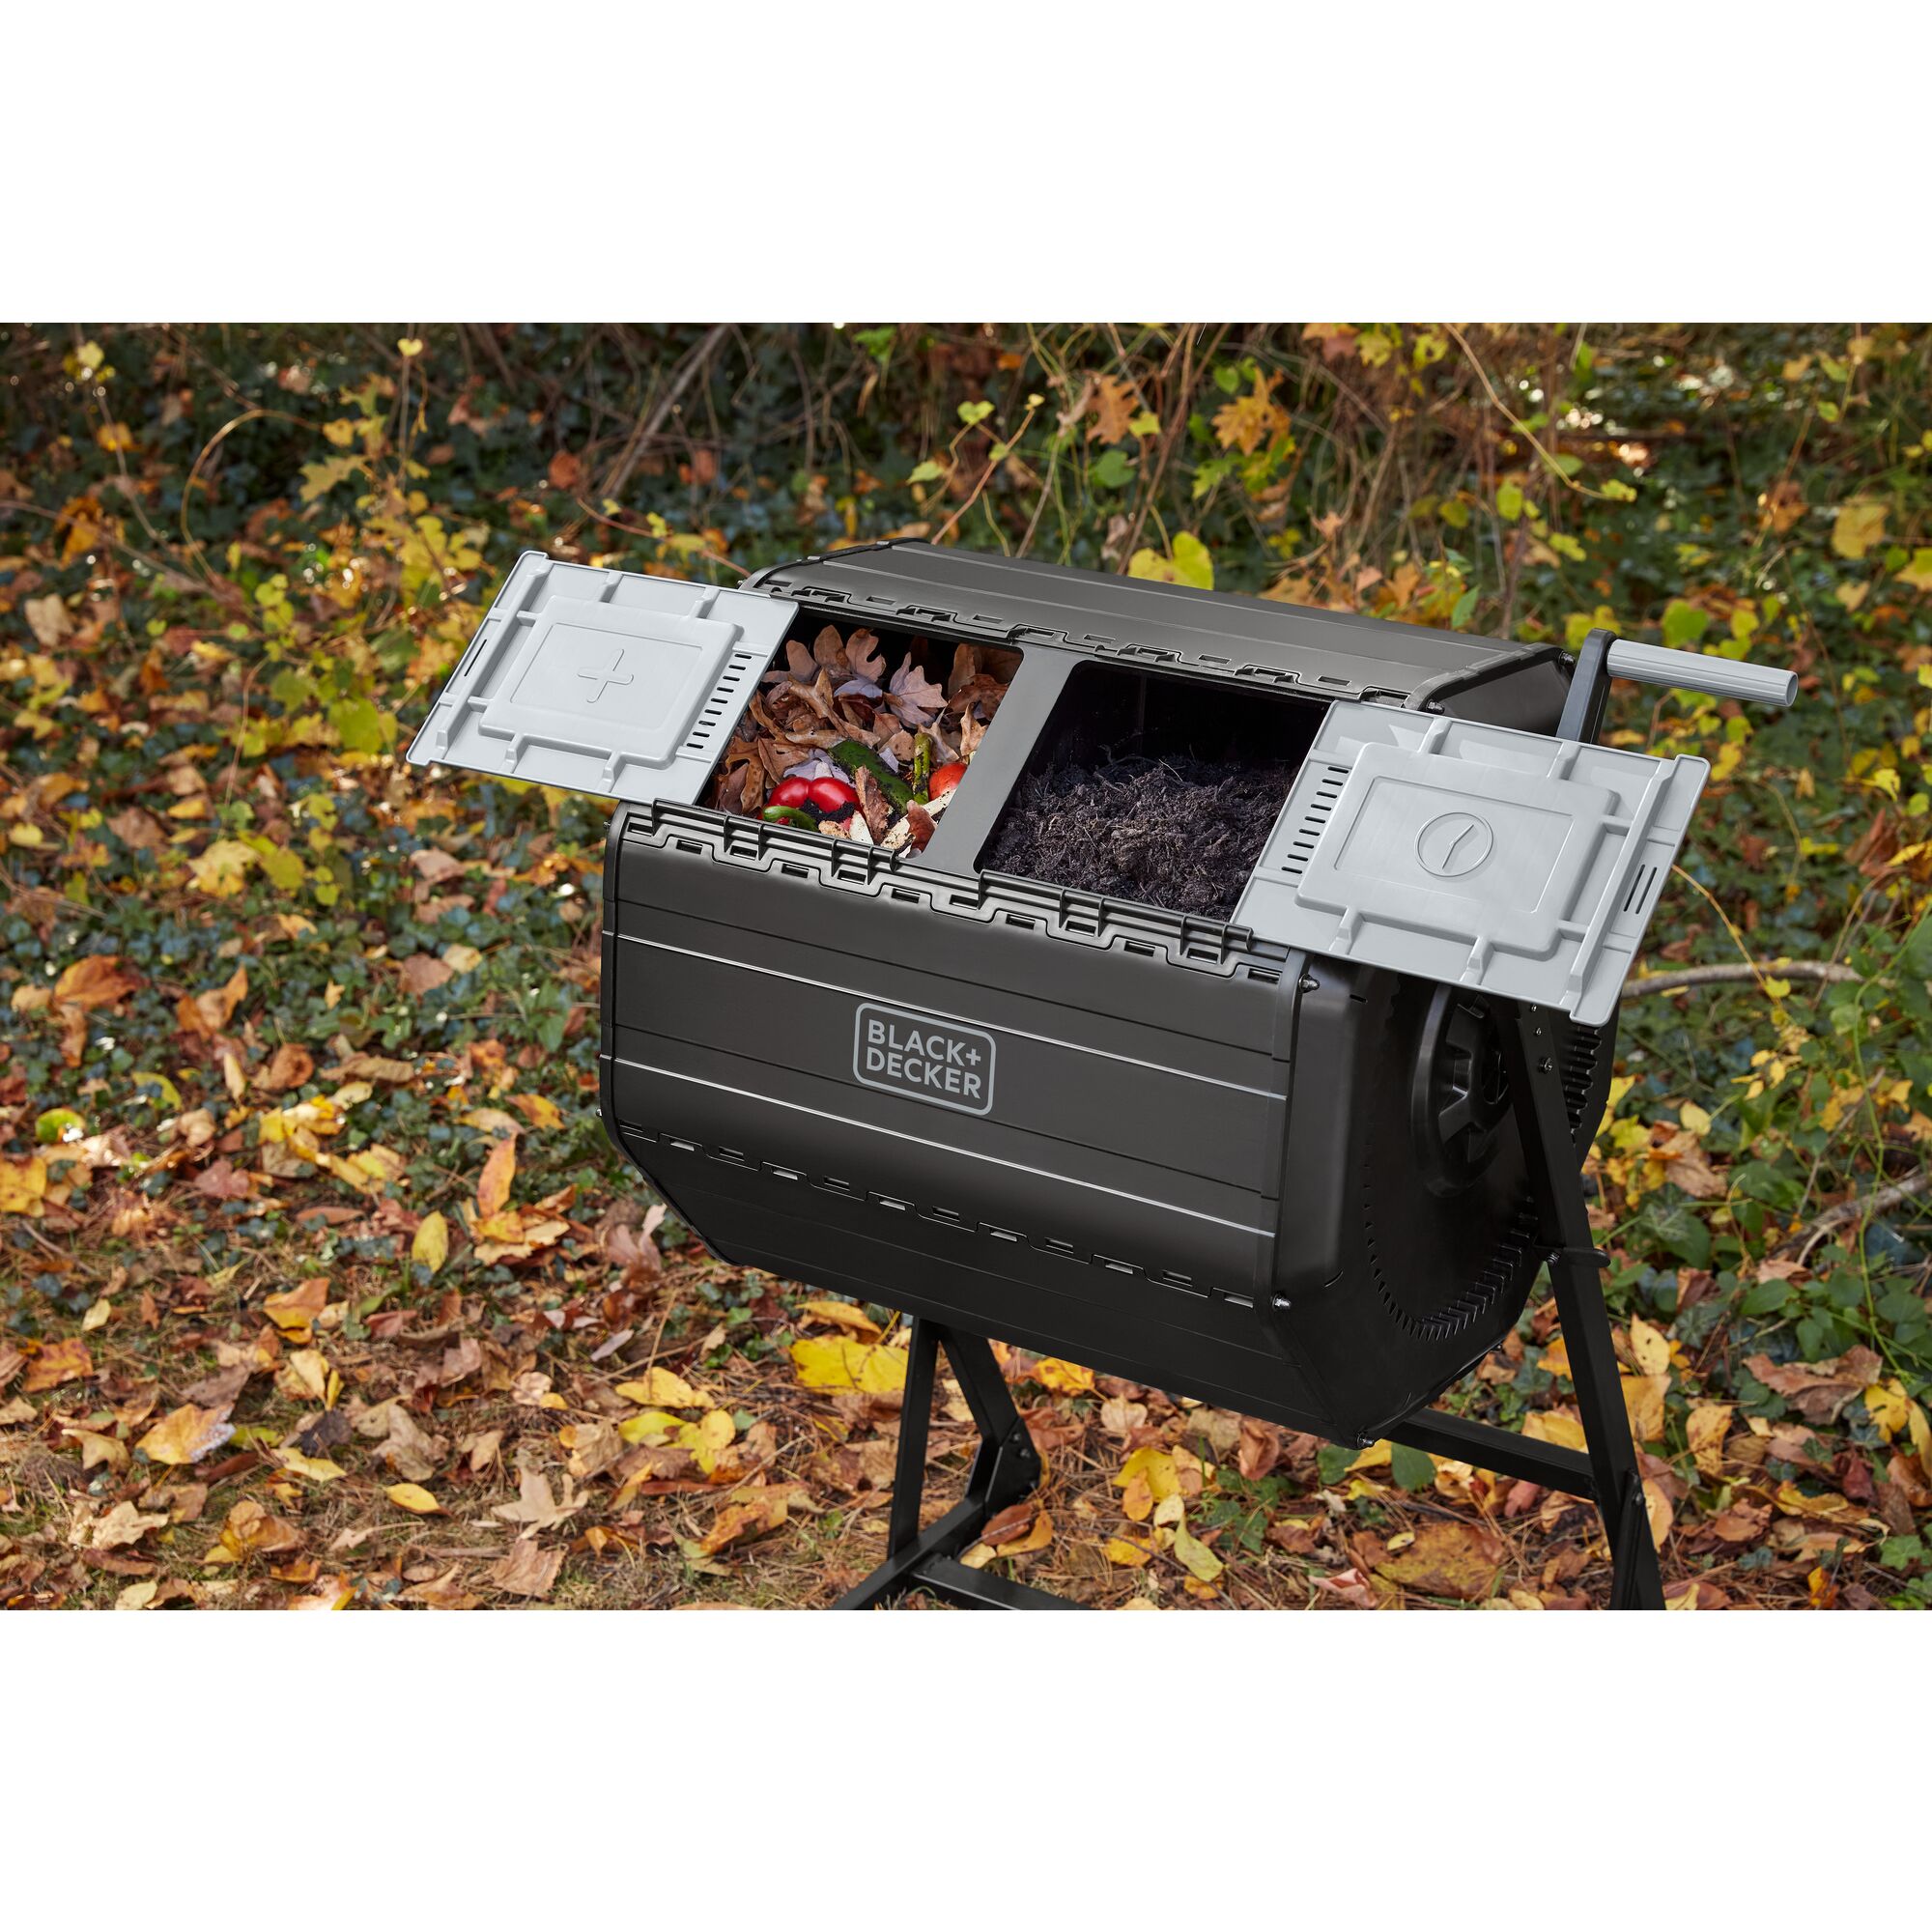 BLACK+DECKER Tumbler Composter with sliding doors open, with pre-compost in the left chamber and final compost in the right